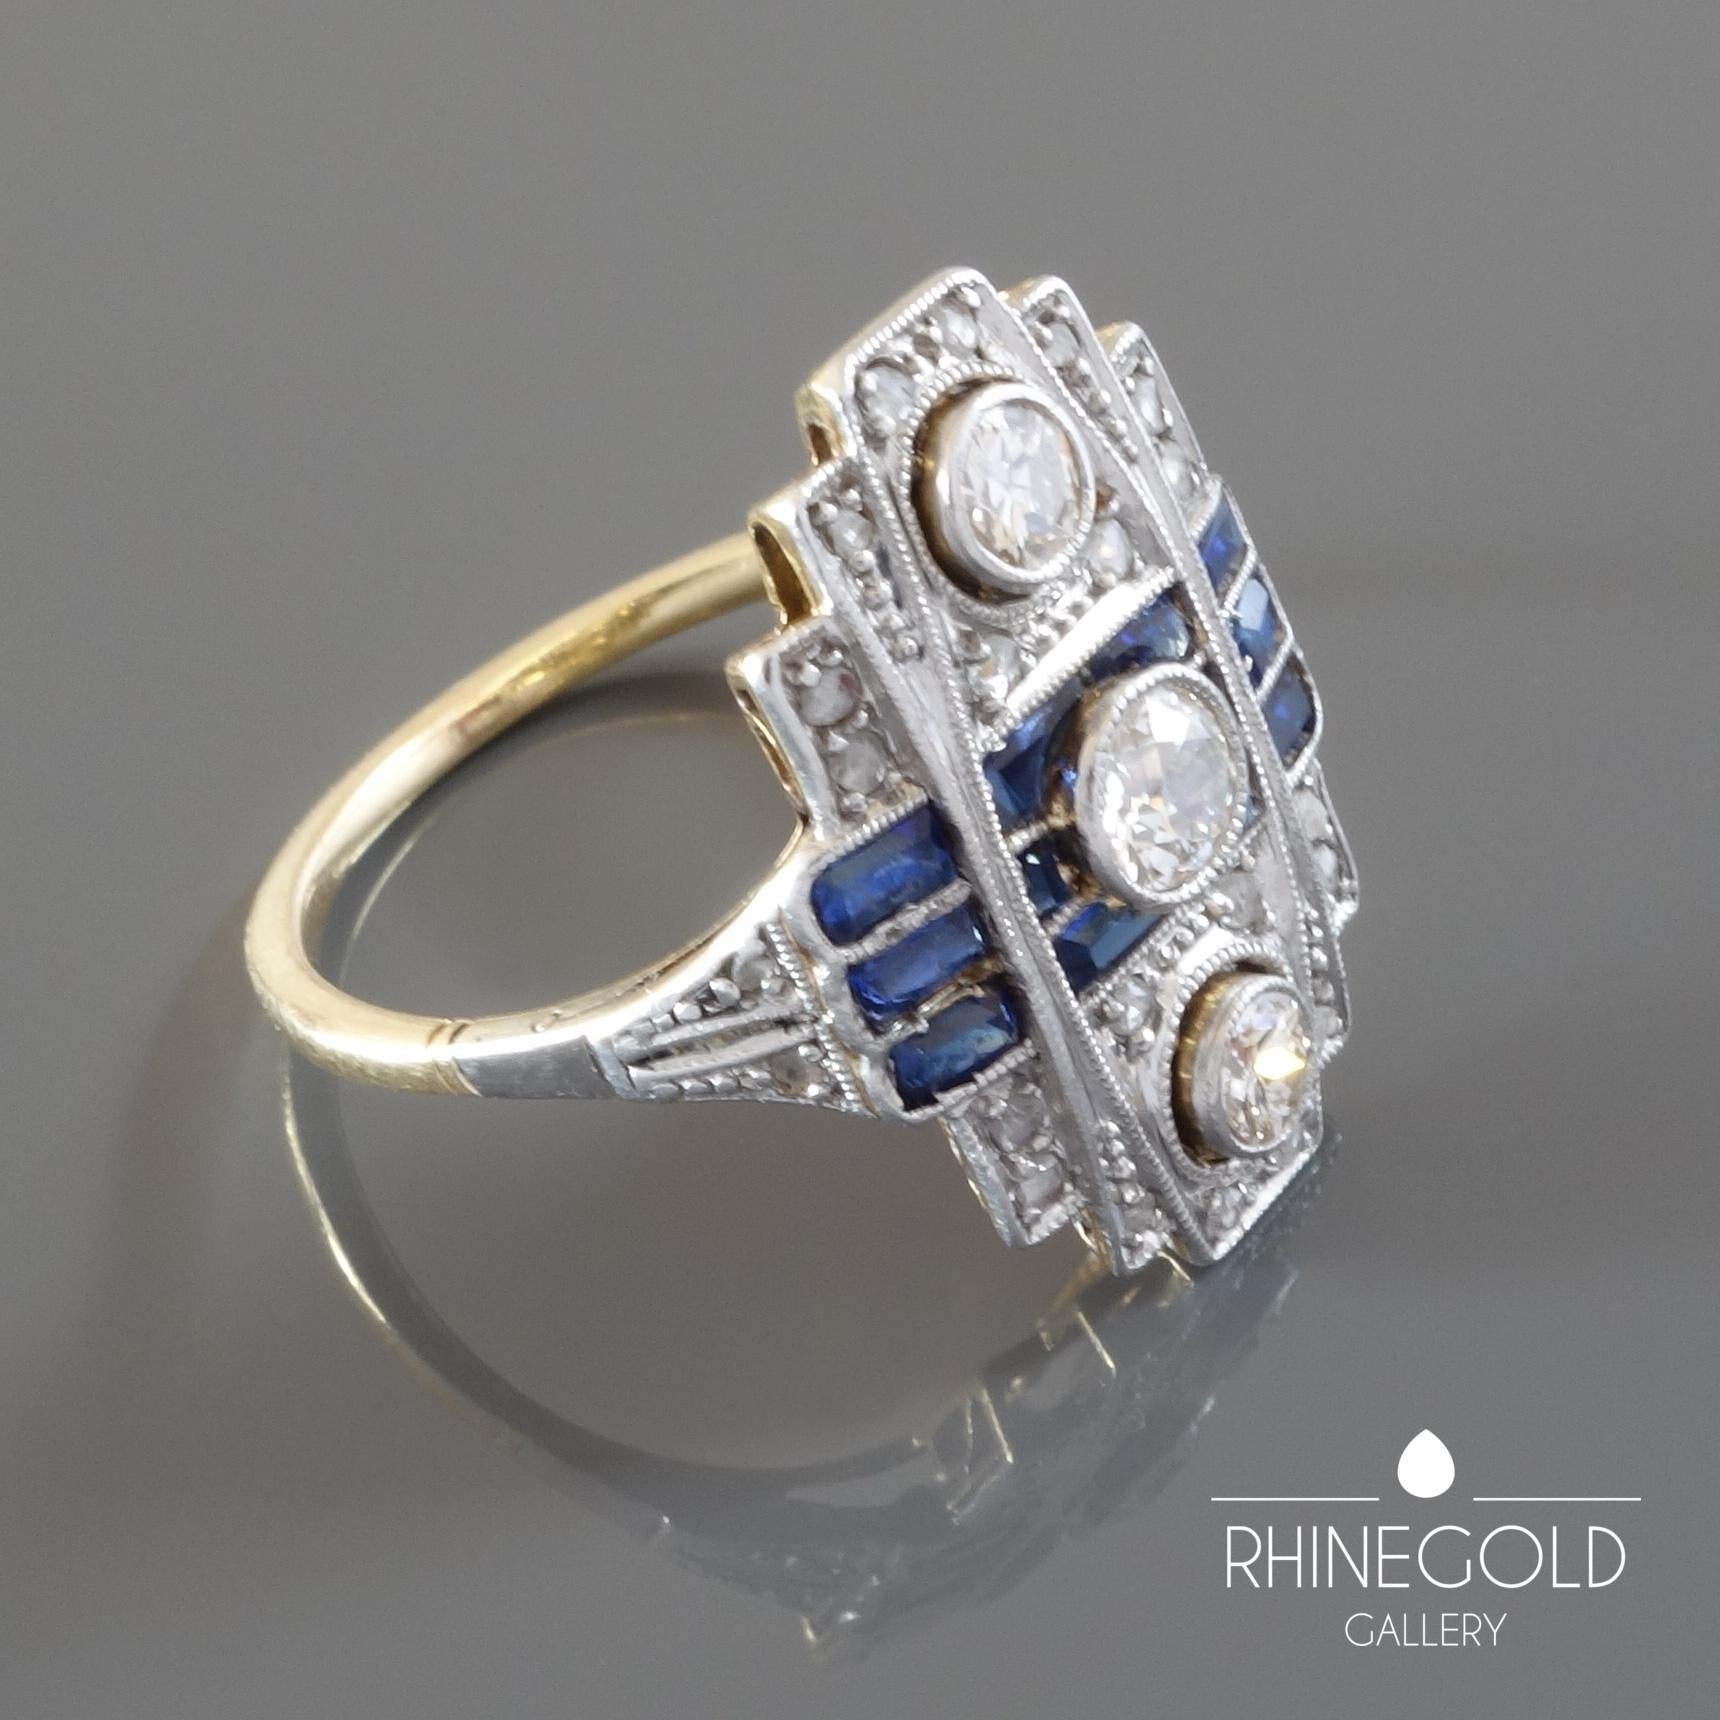 Original Art Deco Diamond Blue Sapphire White Yellow Gold Cocktail Ring
18k white and yellow gold, three old mine cut diamonds of approx. 0.2 + 0.1 + 0.1 carat (J; vvs2-vs1) , numerous small rose cut diamonds, blue sapphires of approx. 0.5 carat in